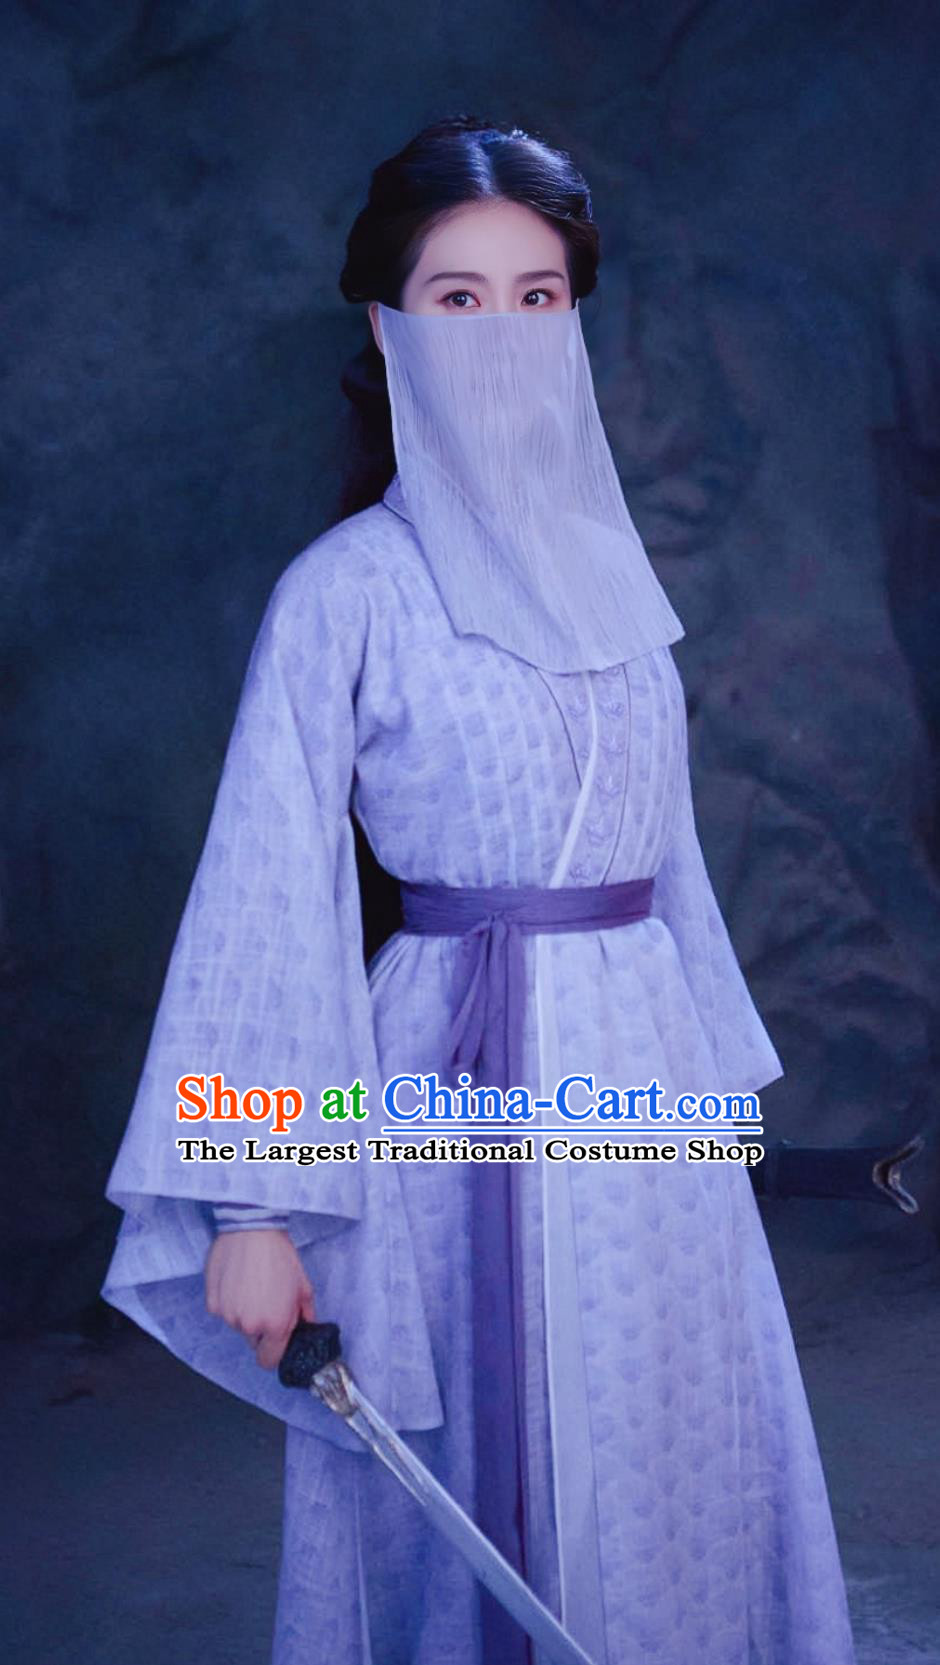 China Ancient Female Assassin Clothing Wuxia Drama Lilac Dress 2023 TV Series A Journey To Love Swordswoman Ren Ru Yi Costume